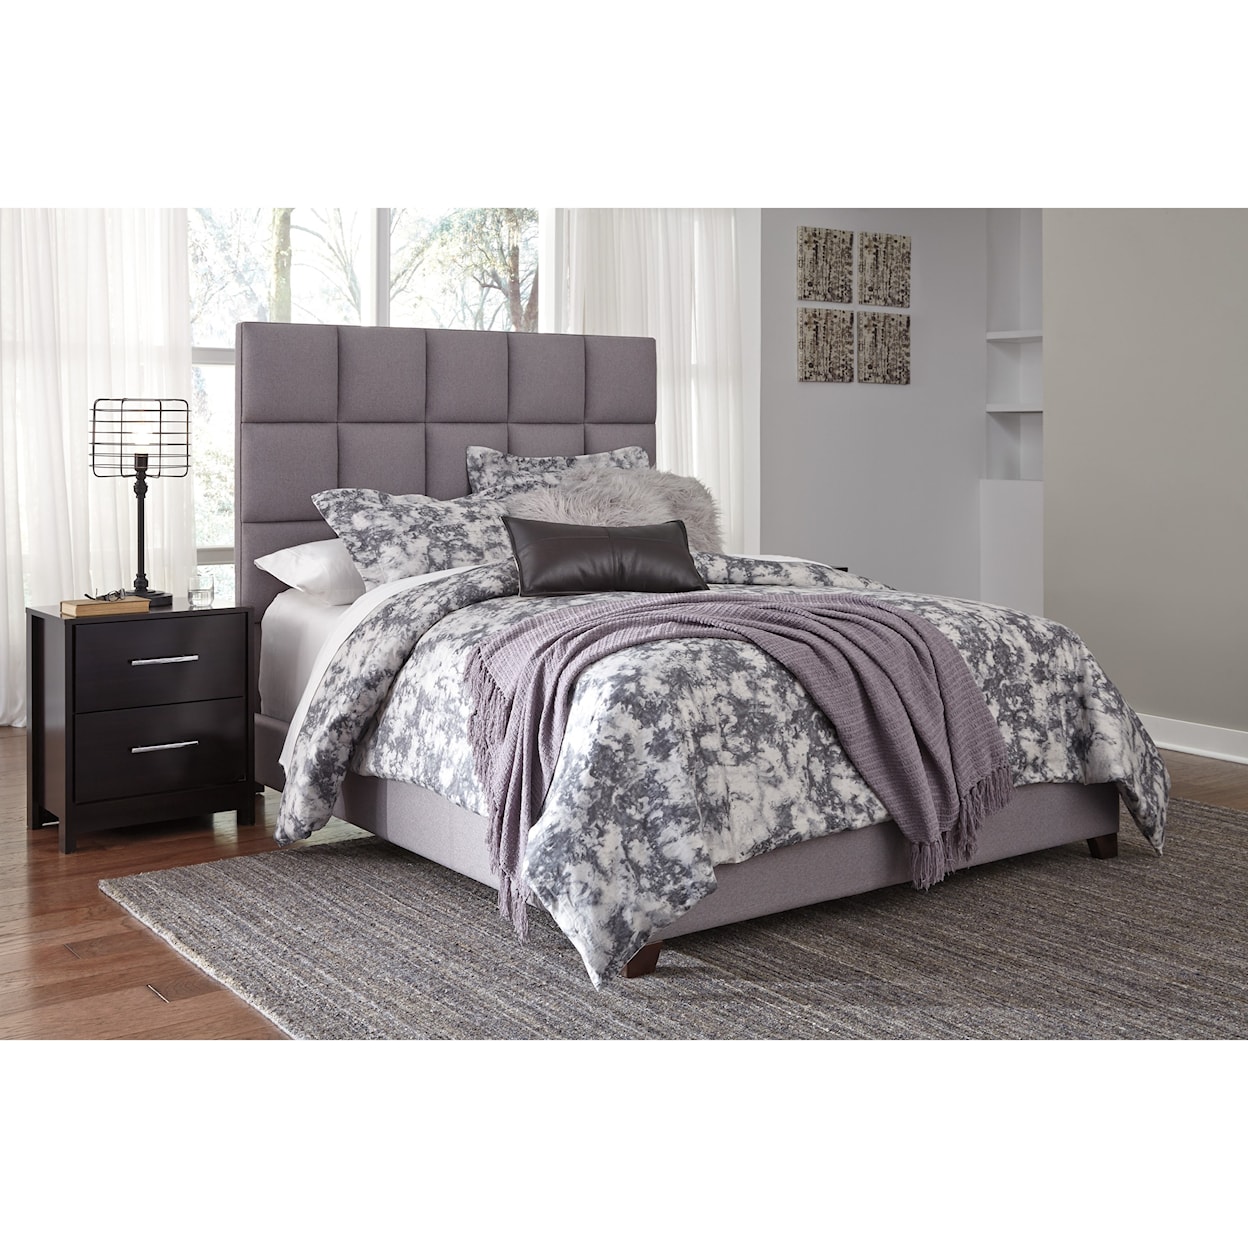 Ashley Contemporary Upholstered Beds Dolante Queen Upholstered Bed